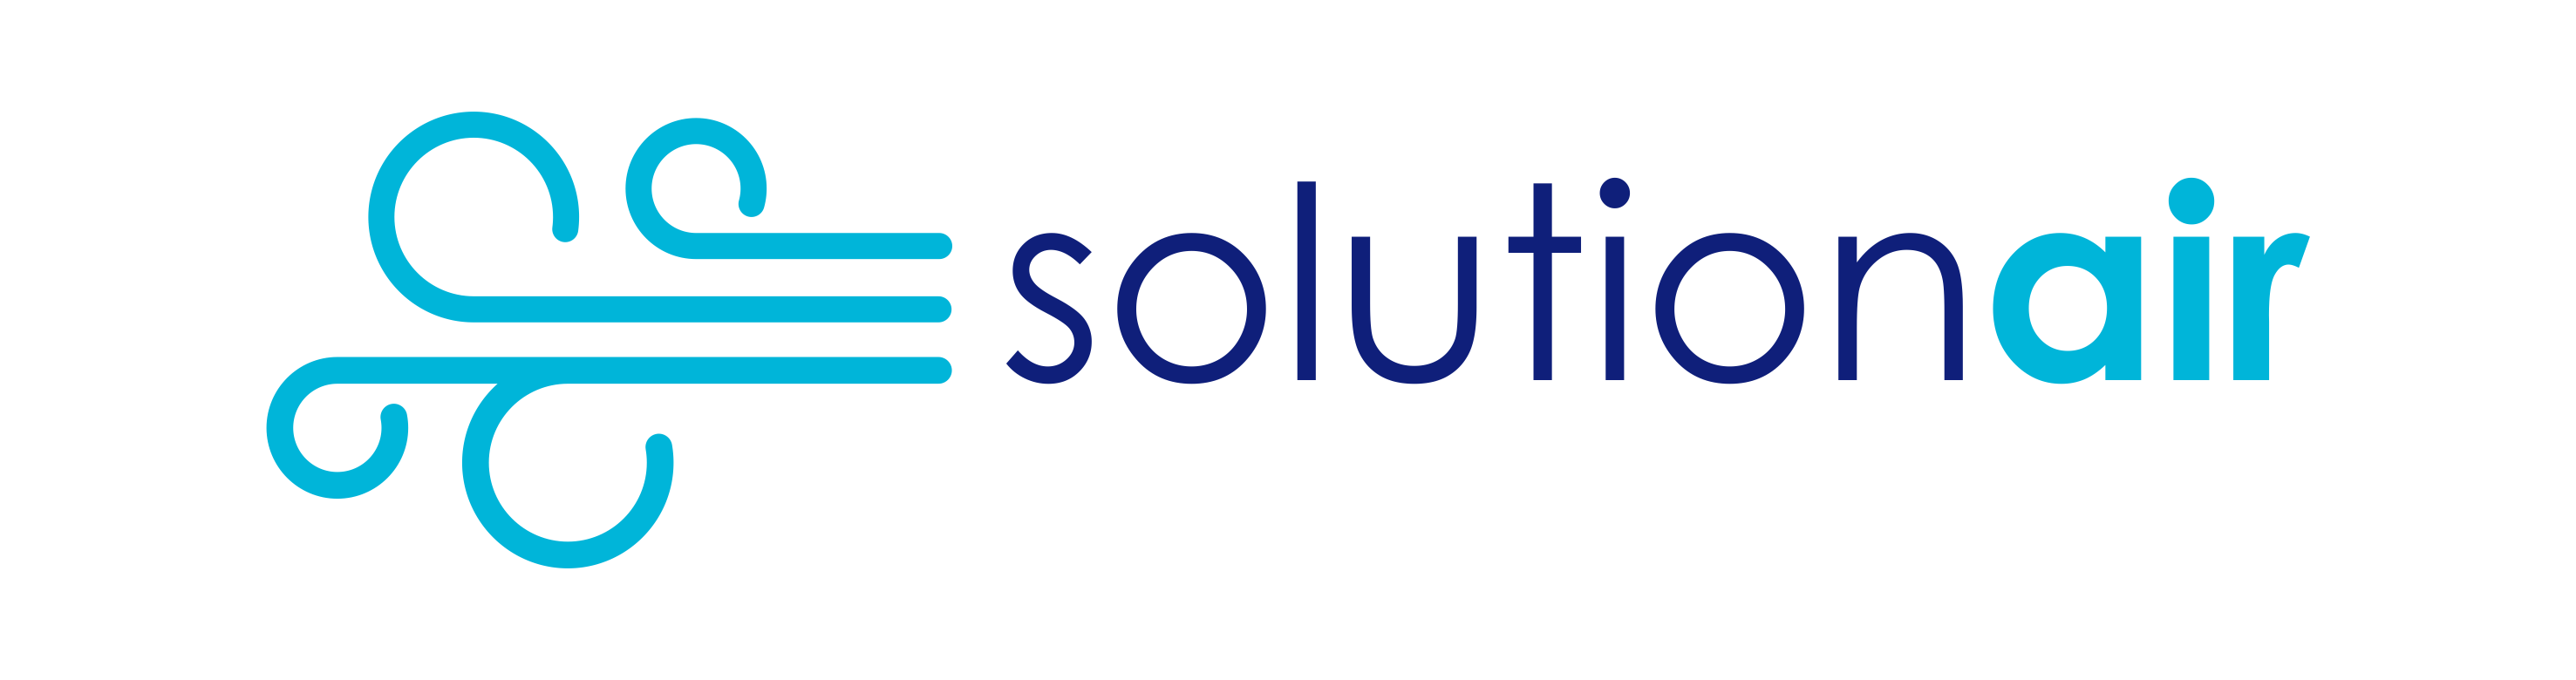 108983161 solutionair logo without background high quality